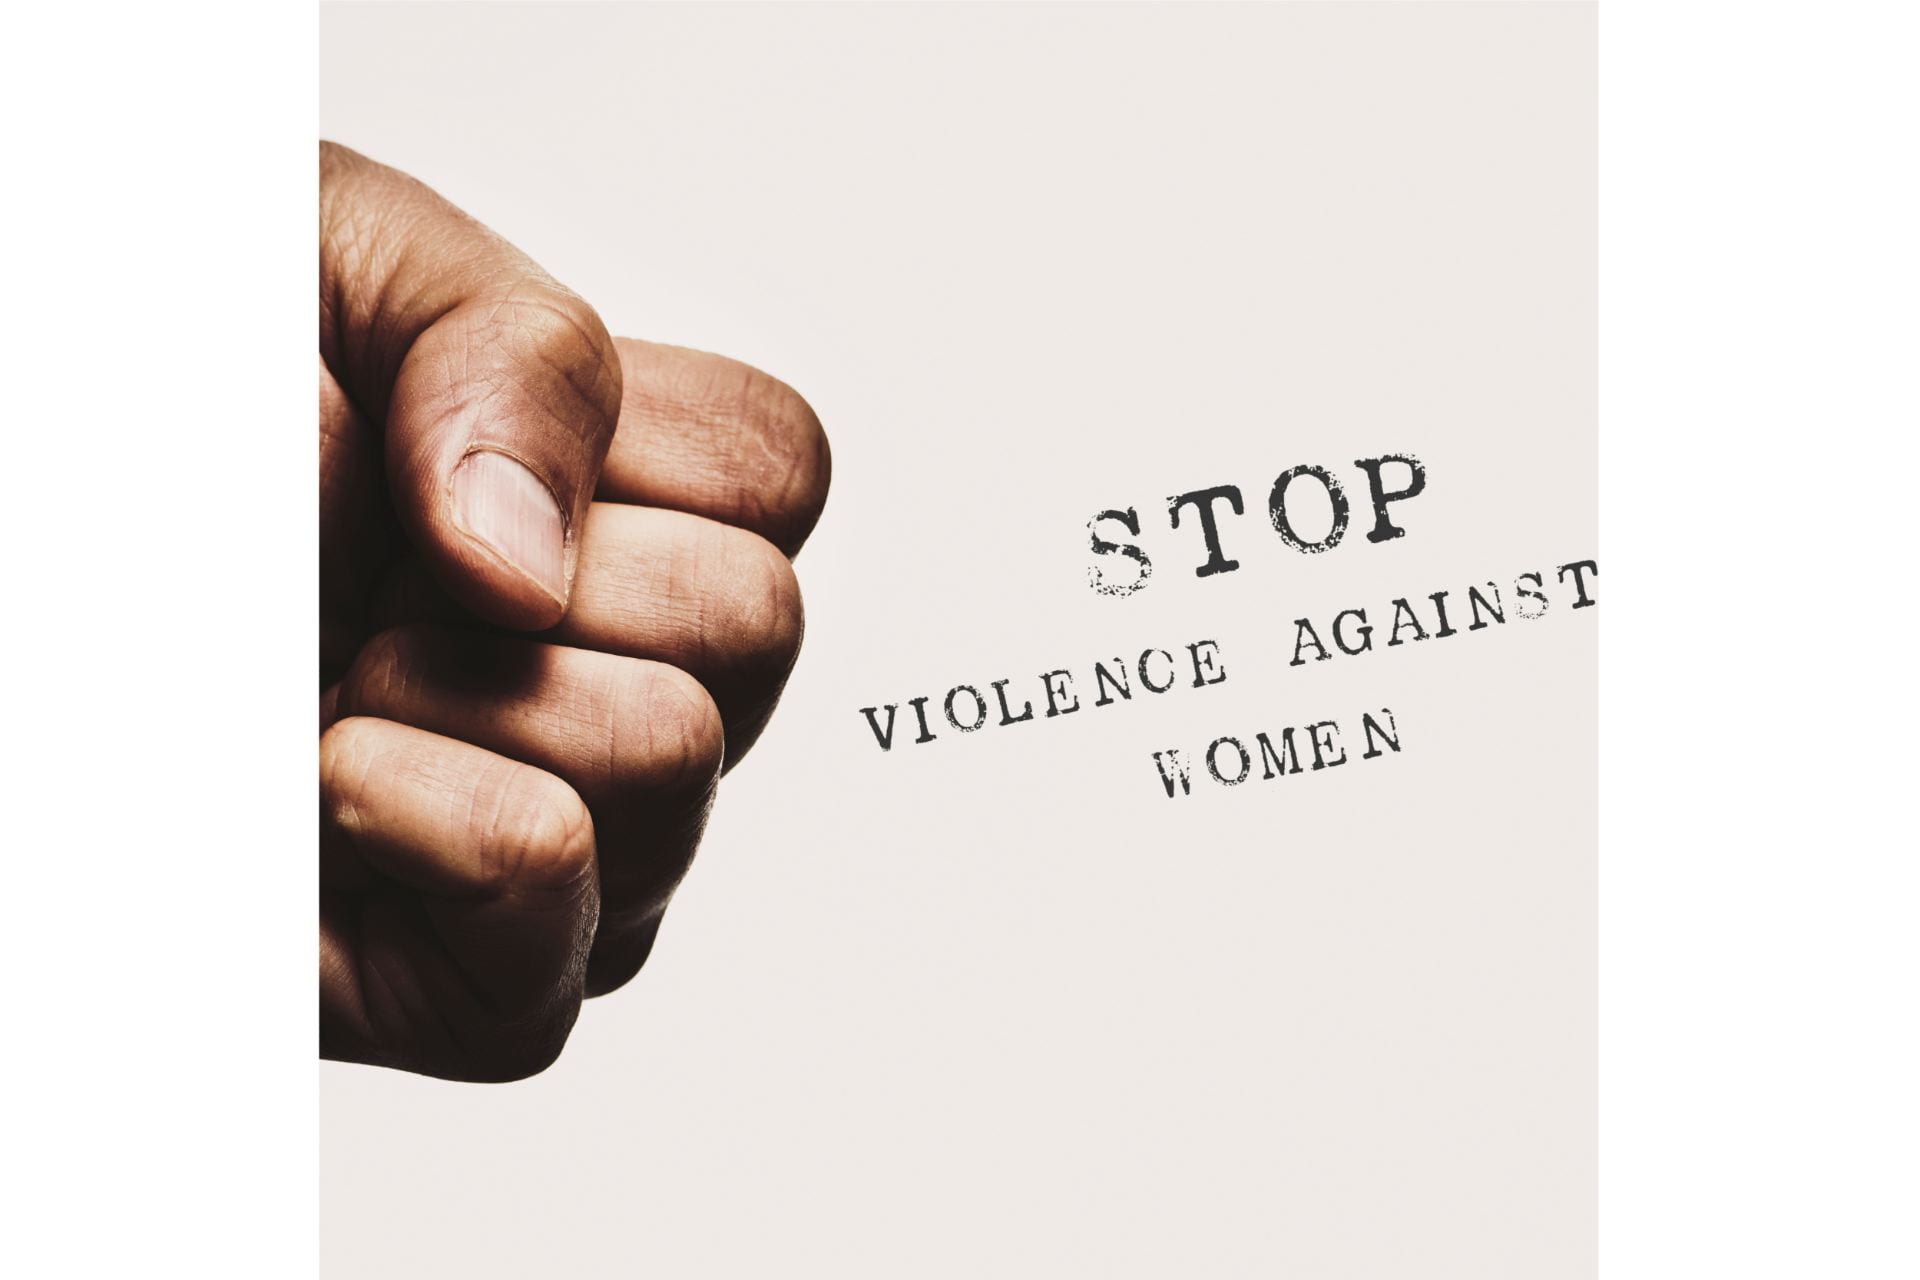 poster with image of a closed fist; text: Stop Violence Against Women